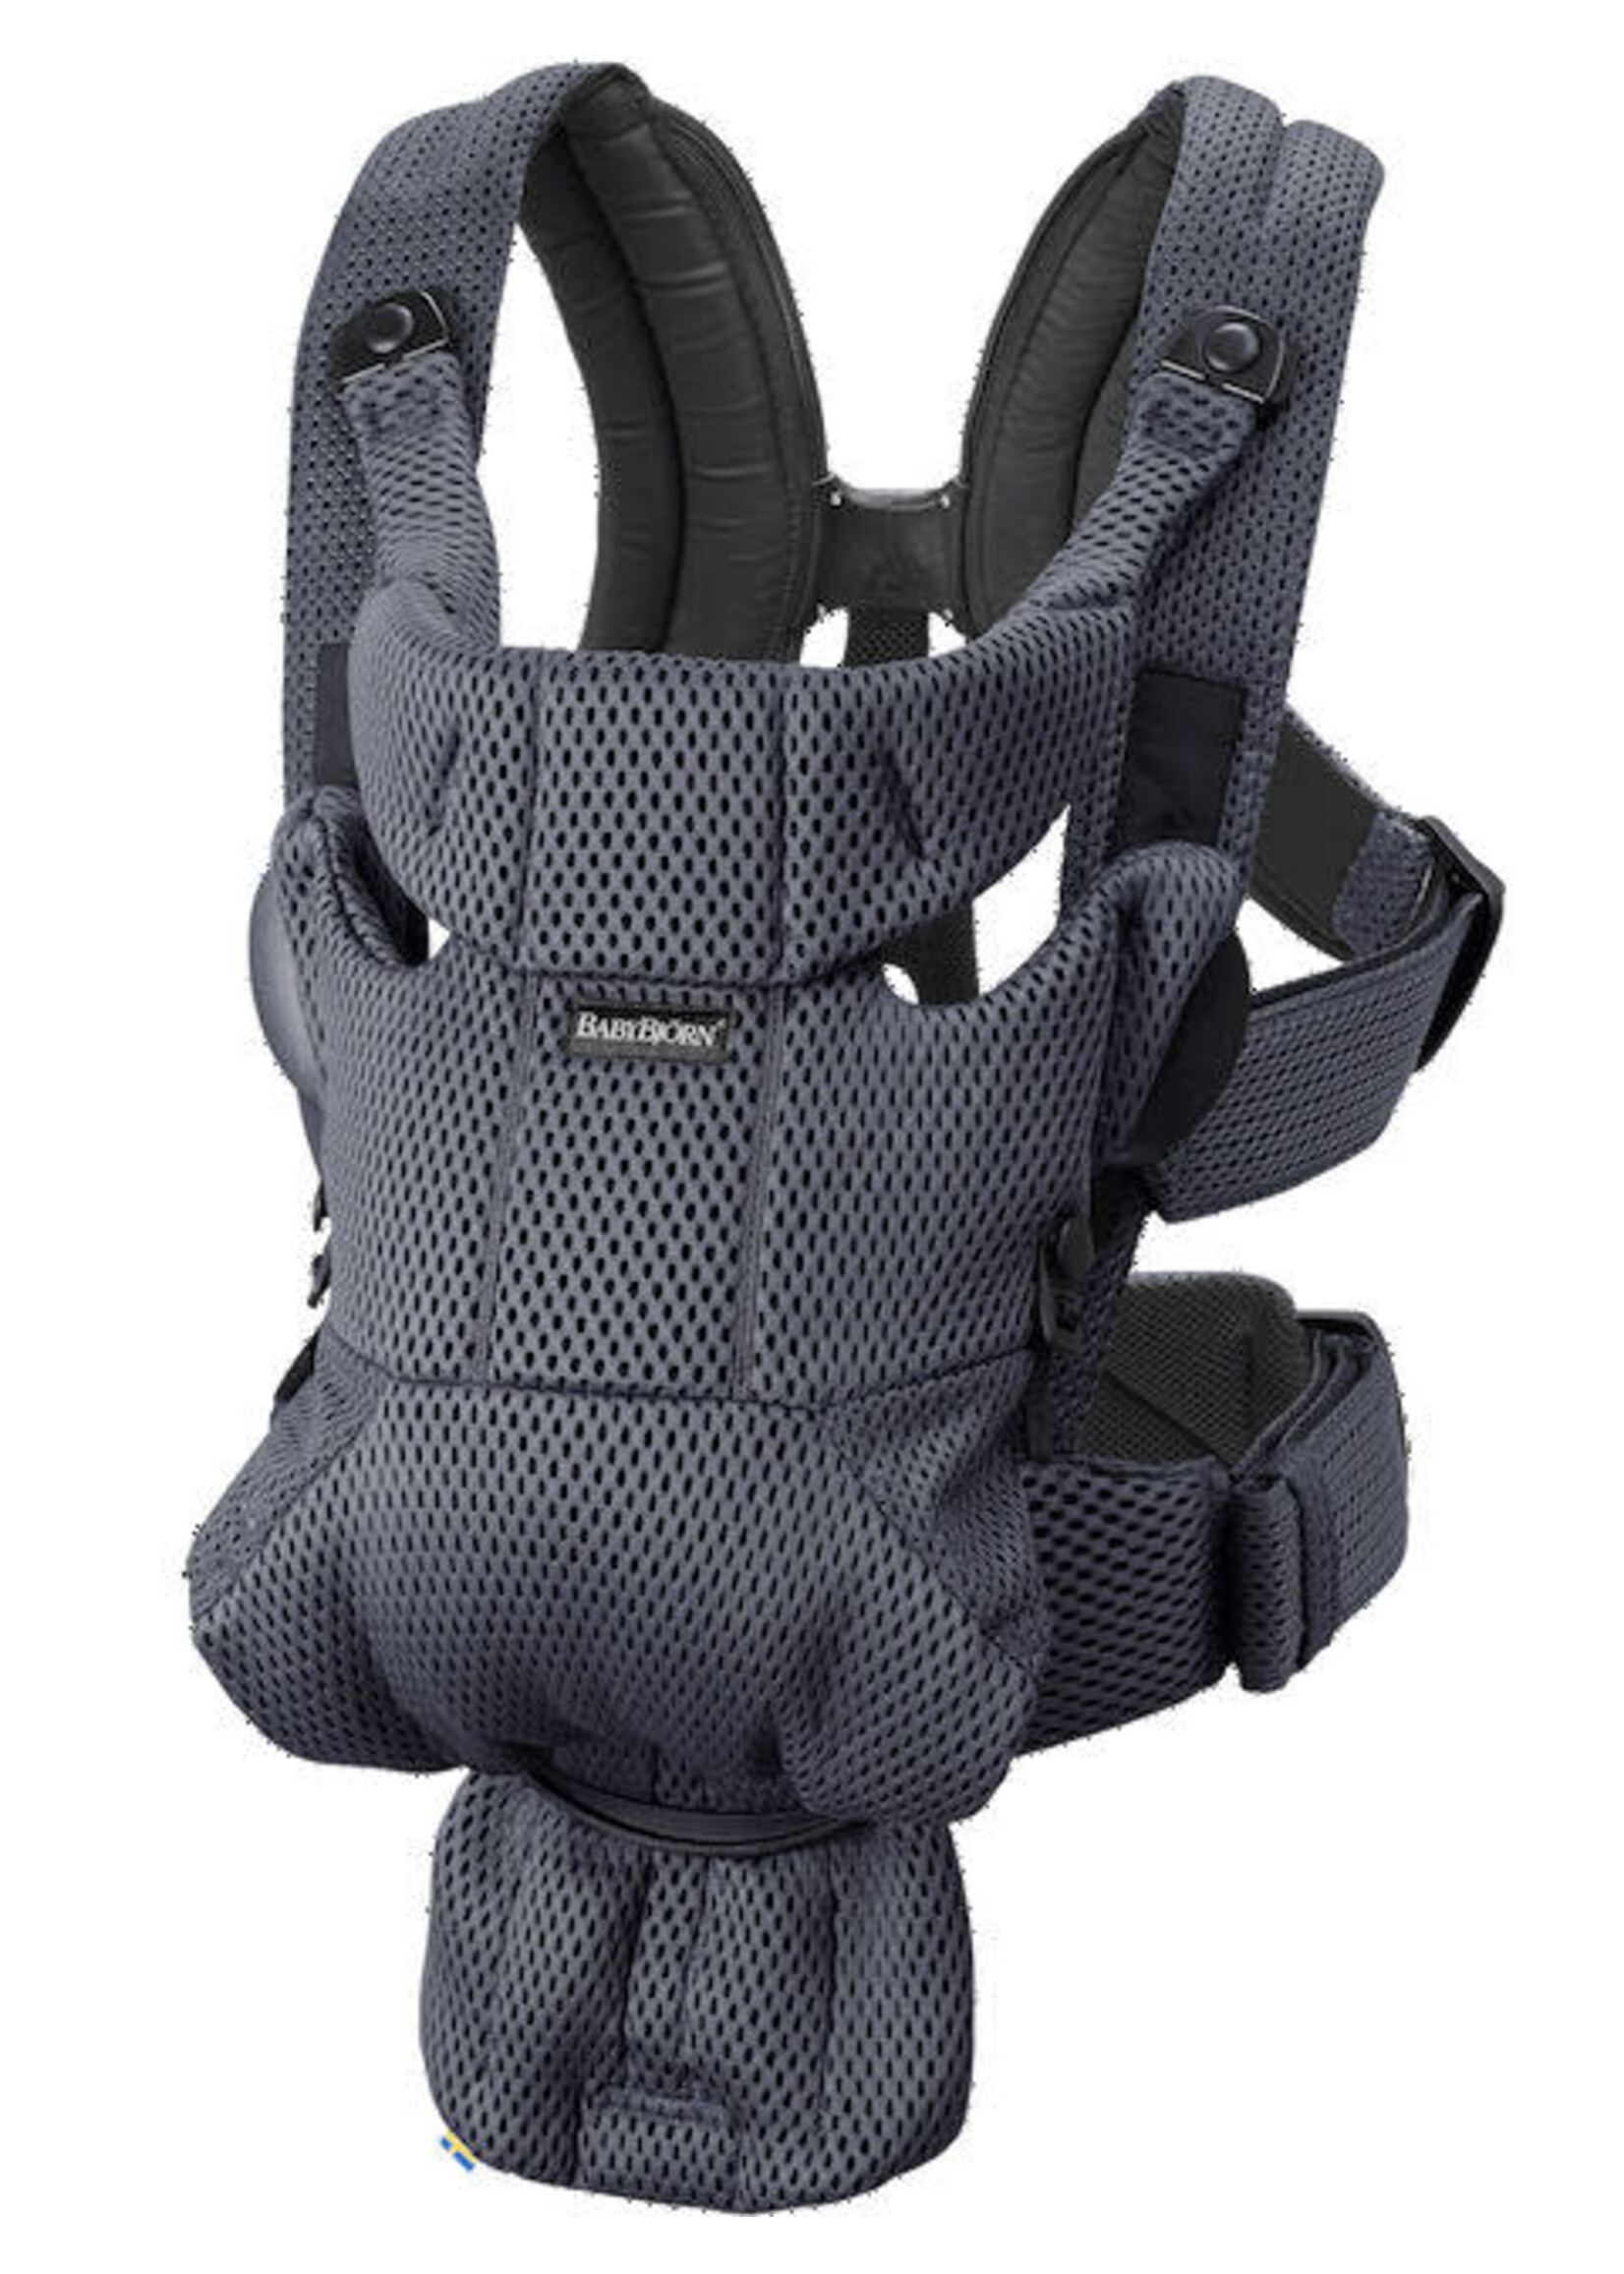 Babybjorn Babybjörn / Baby carrier move / Airy mesh Anthracite